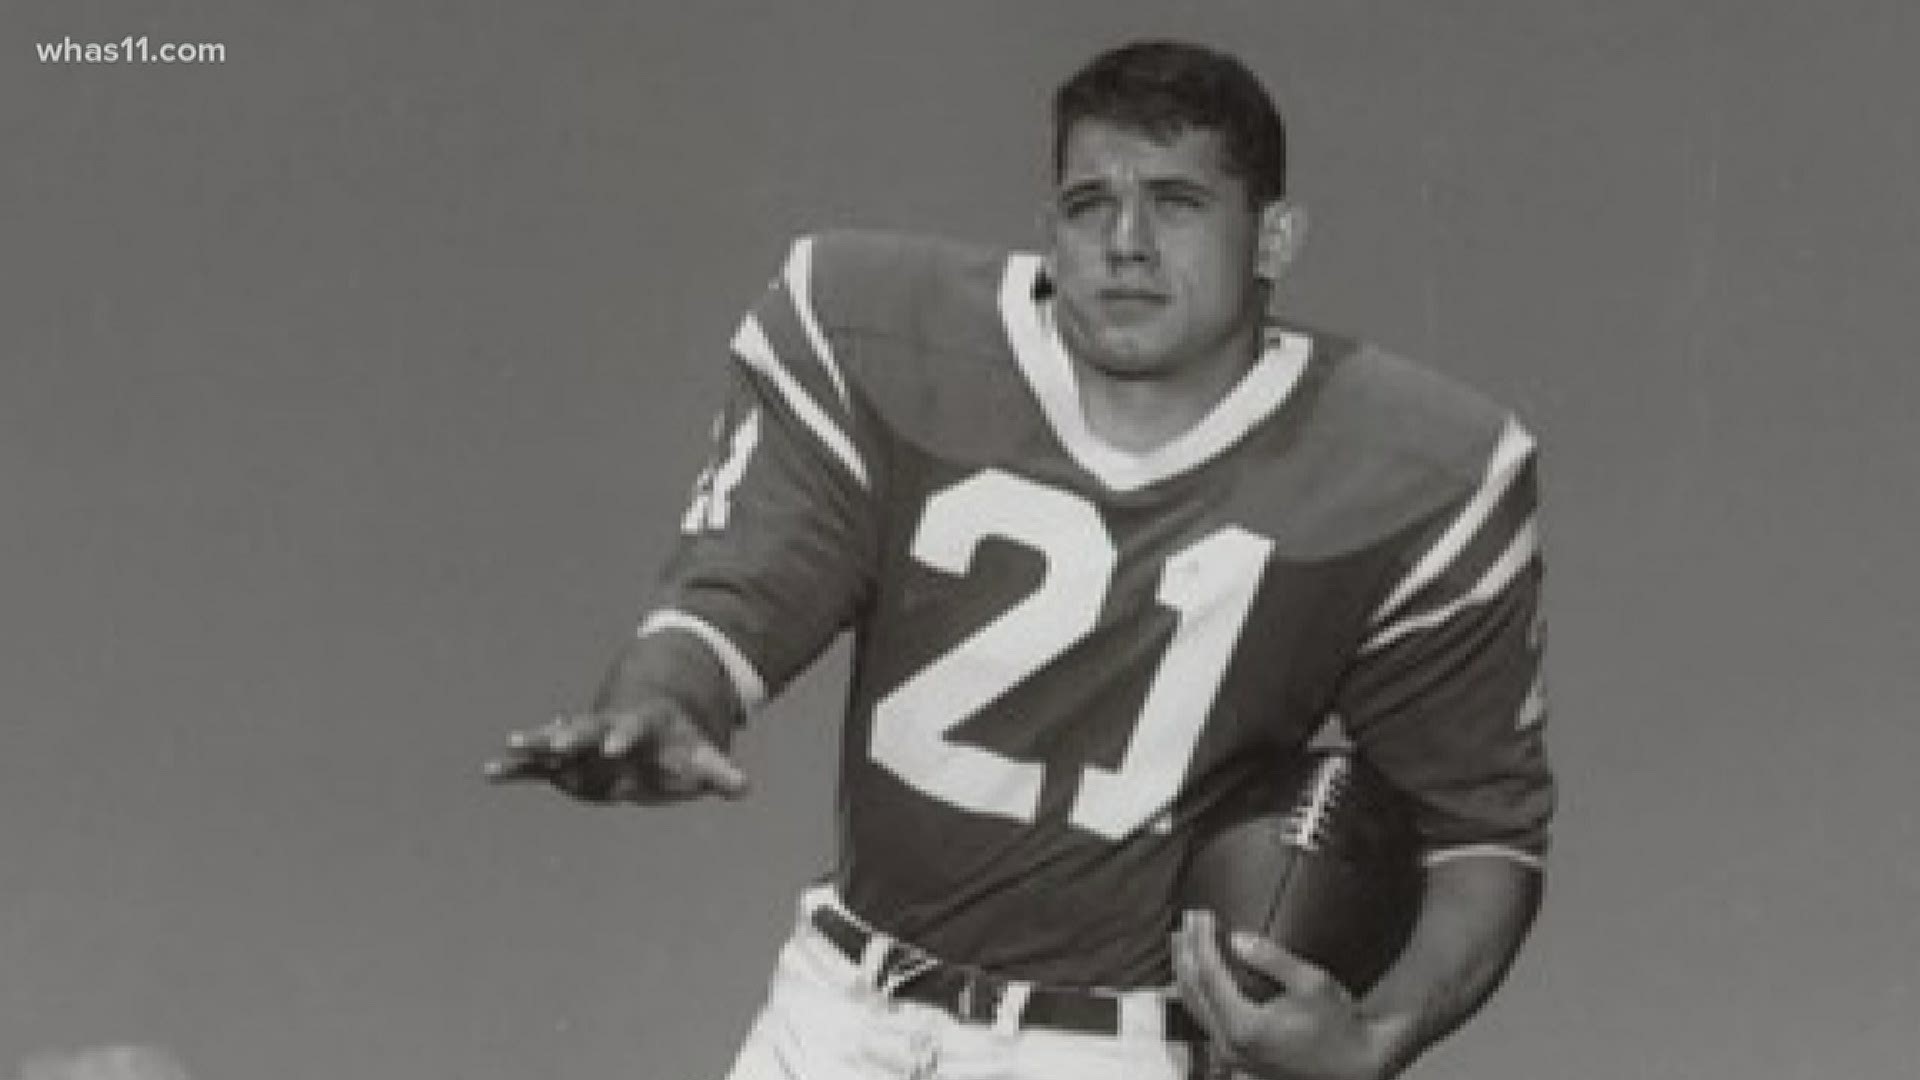 The first team All-American and two-time SEC selection for the Wildcats passed away at the age of 76.